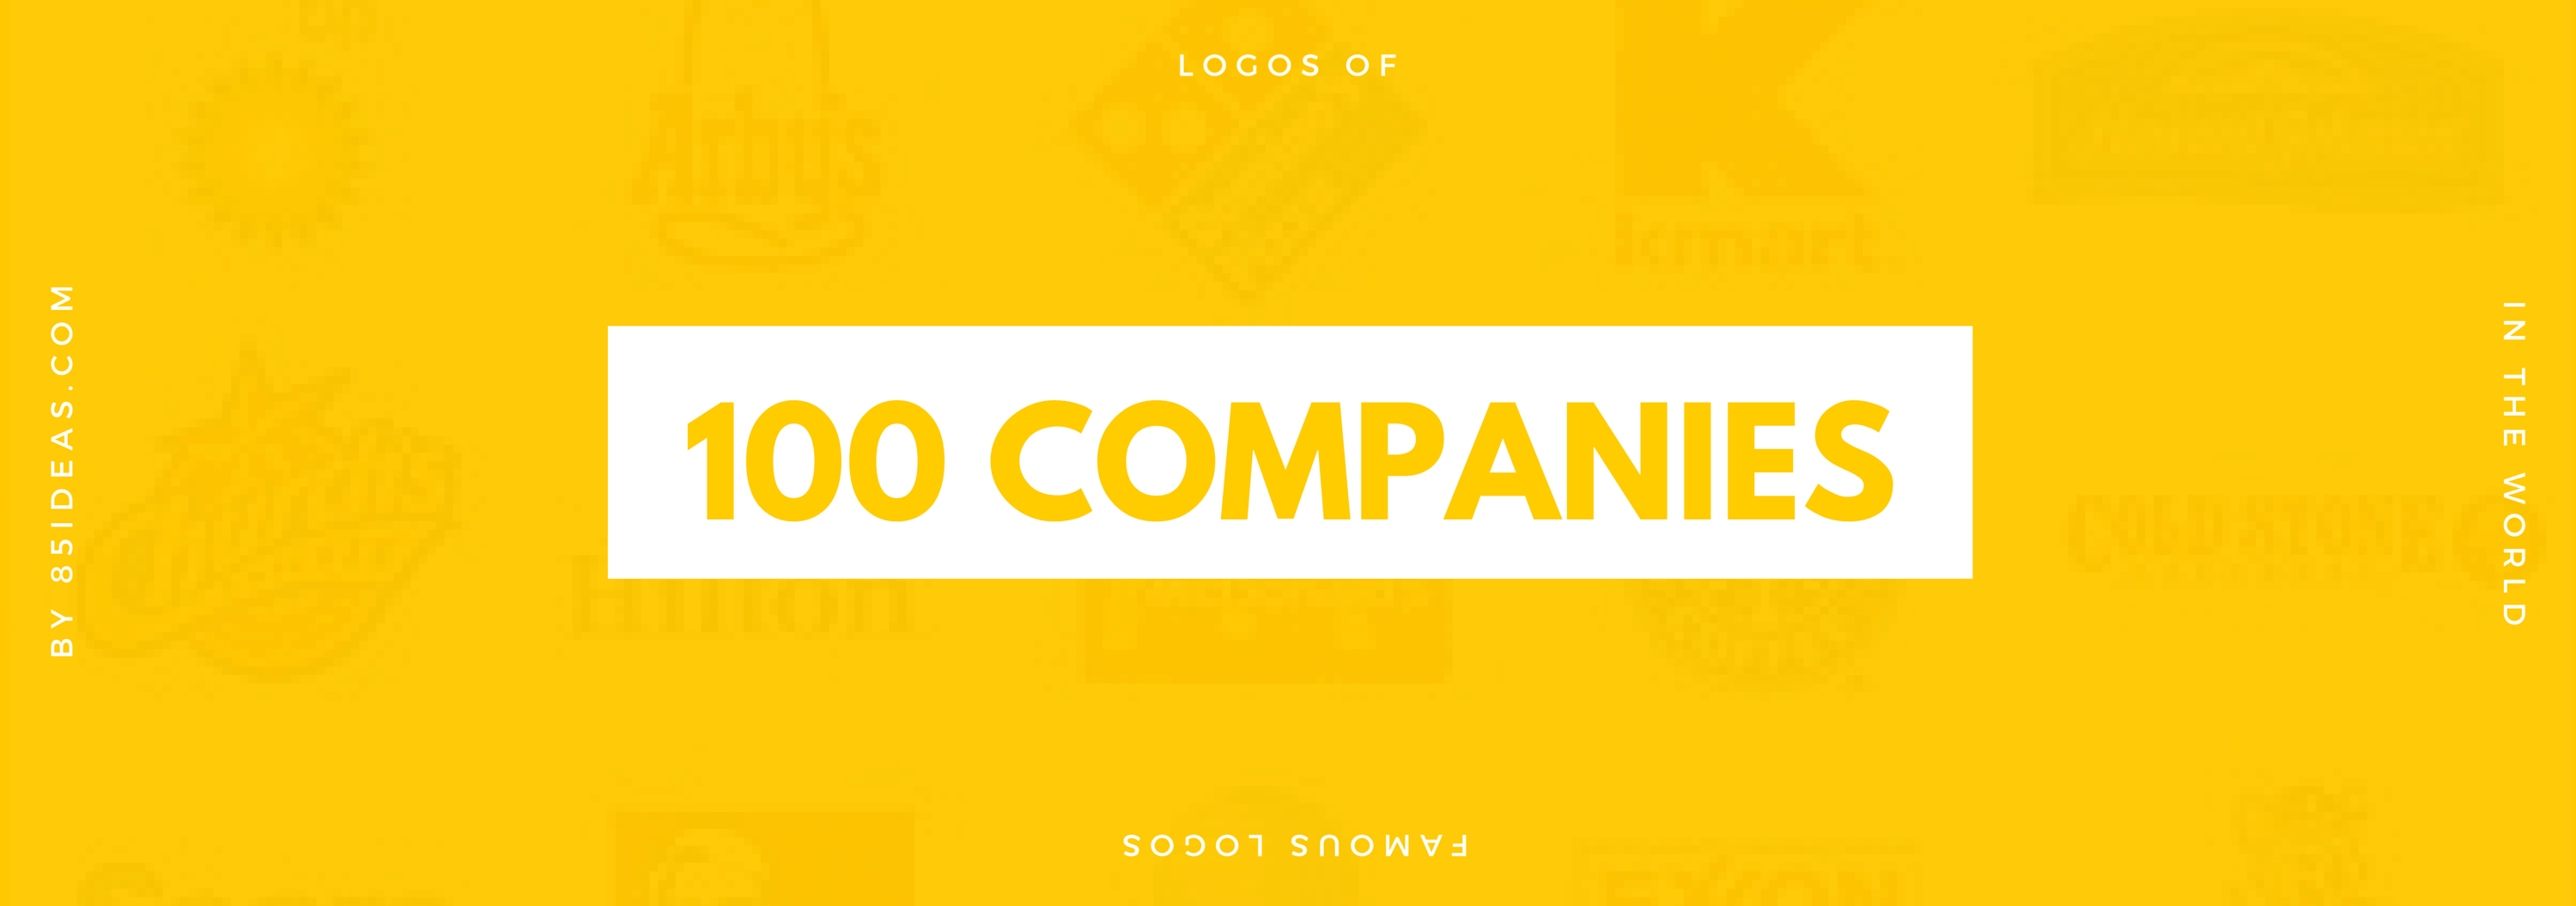 Yellow Company Logo - Logos of the 100 Largest Companies in the World